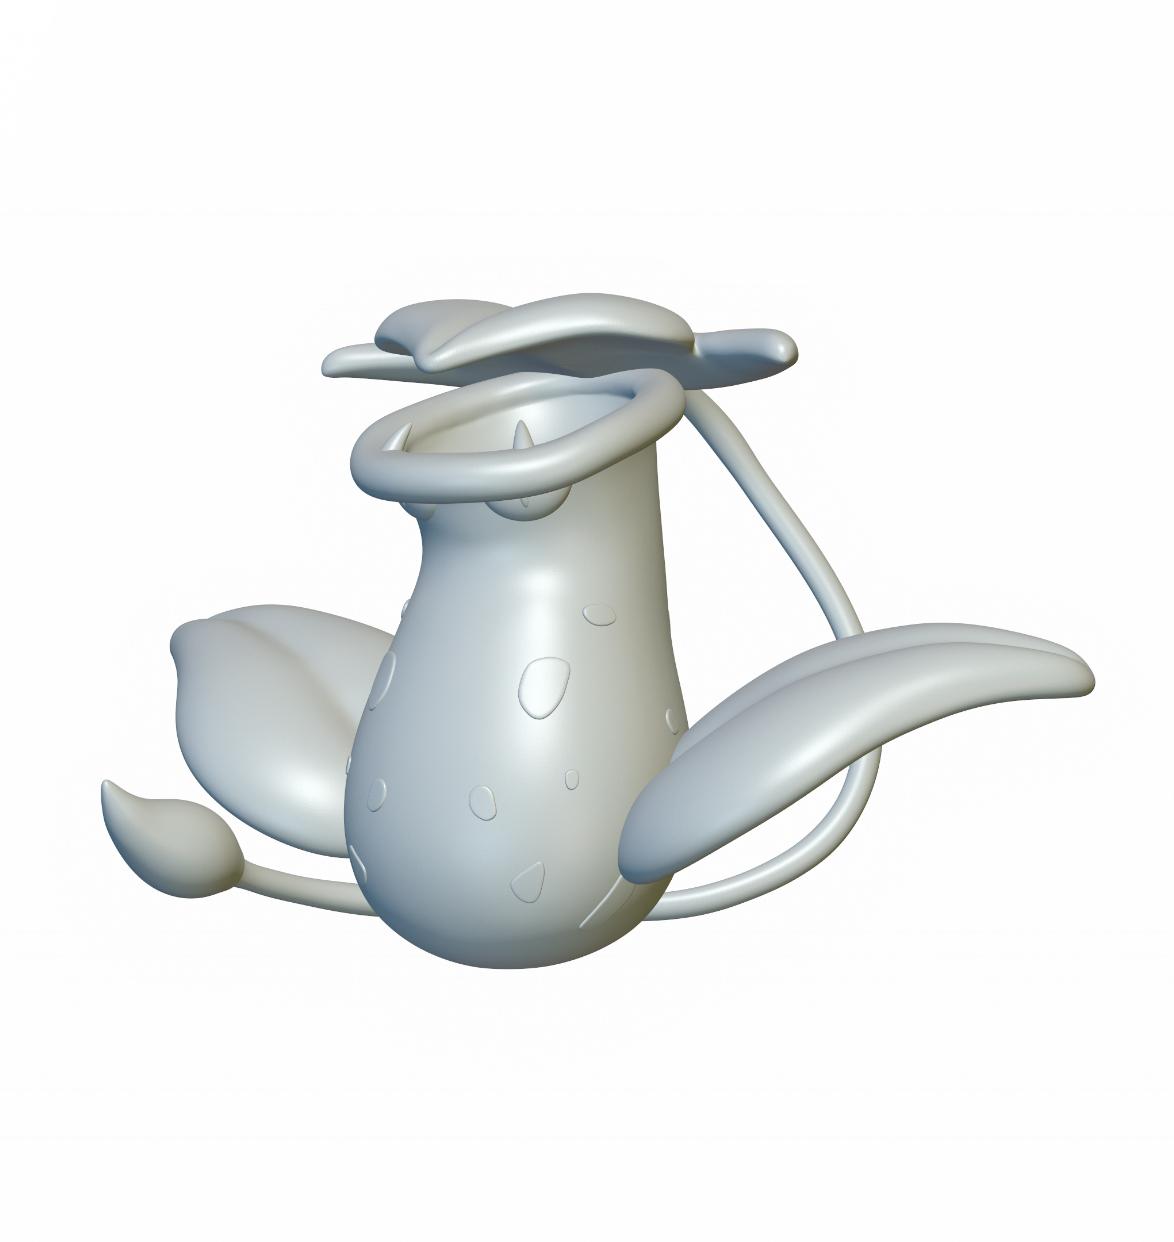 Pokemon Victreebell #71 - Optimized for 3D Printing 3d model